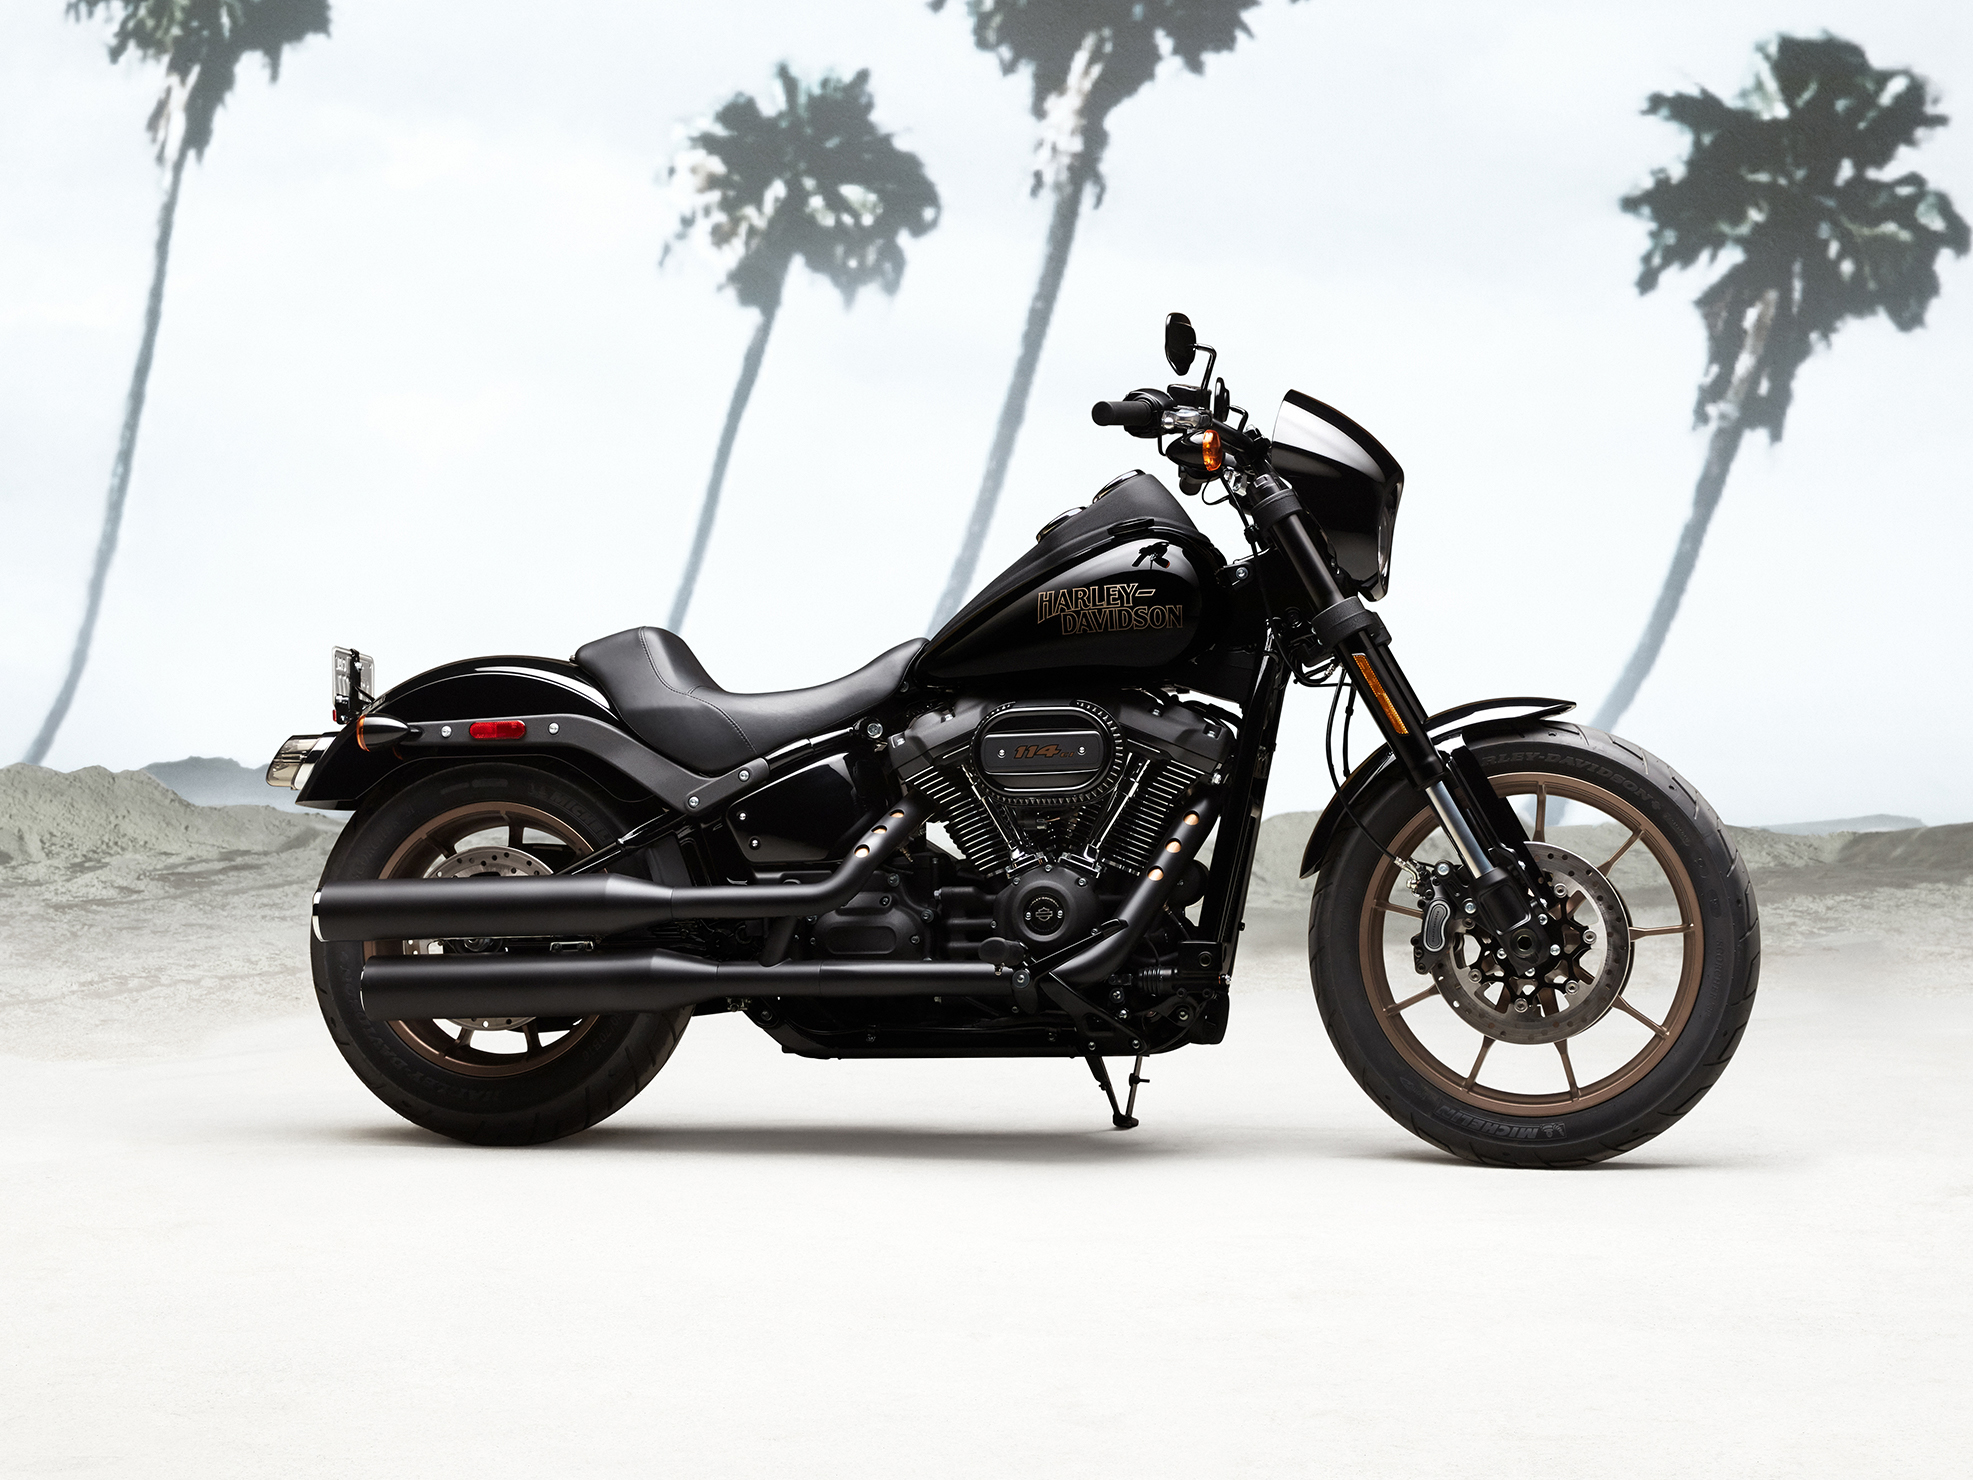 Motocyclette Low  Rider S  2020  Harley  Davidson  Canada